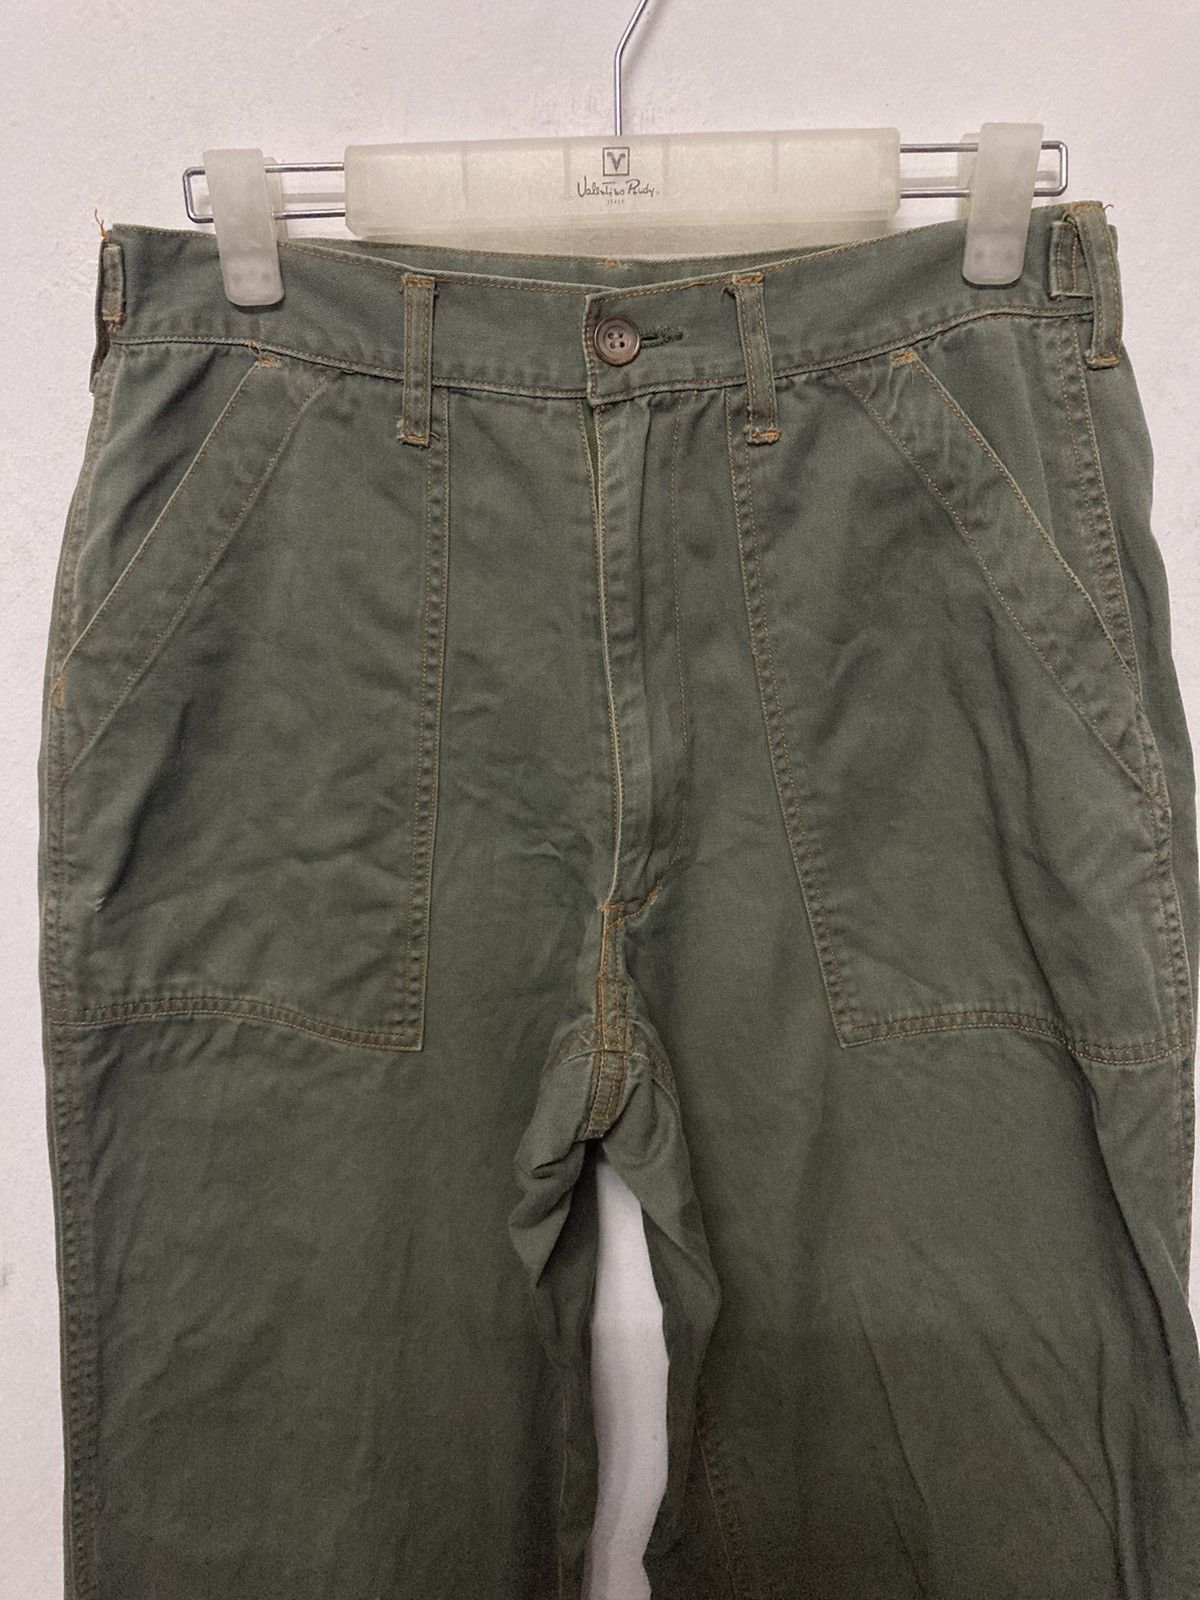 Vintage Soldout Japanese Brand Large Pocket Army Style Pants - 4